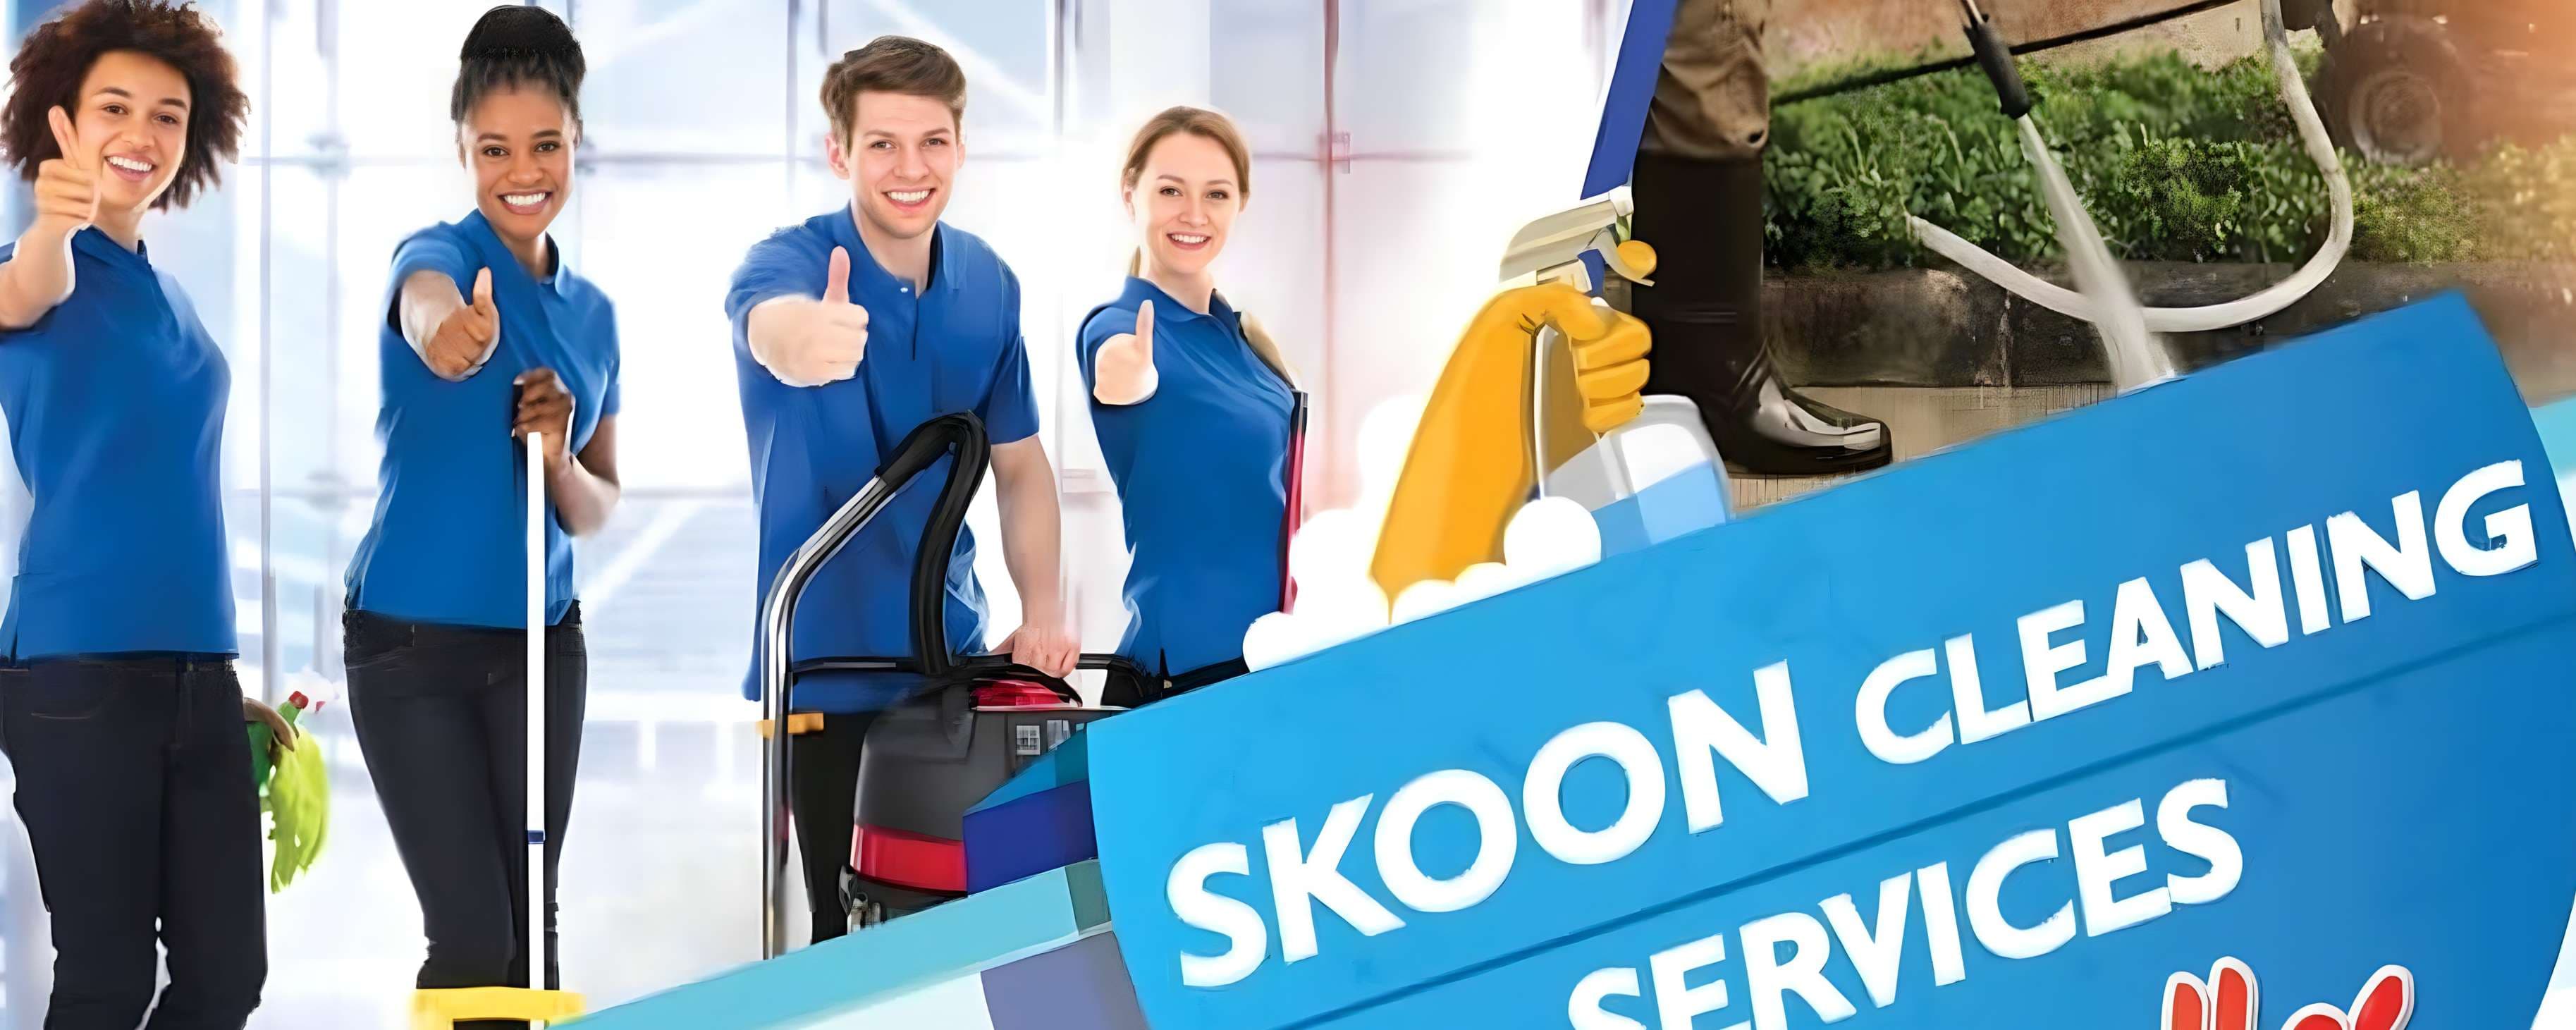 SKOON Cleaning Services Seychelles